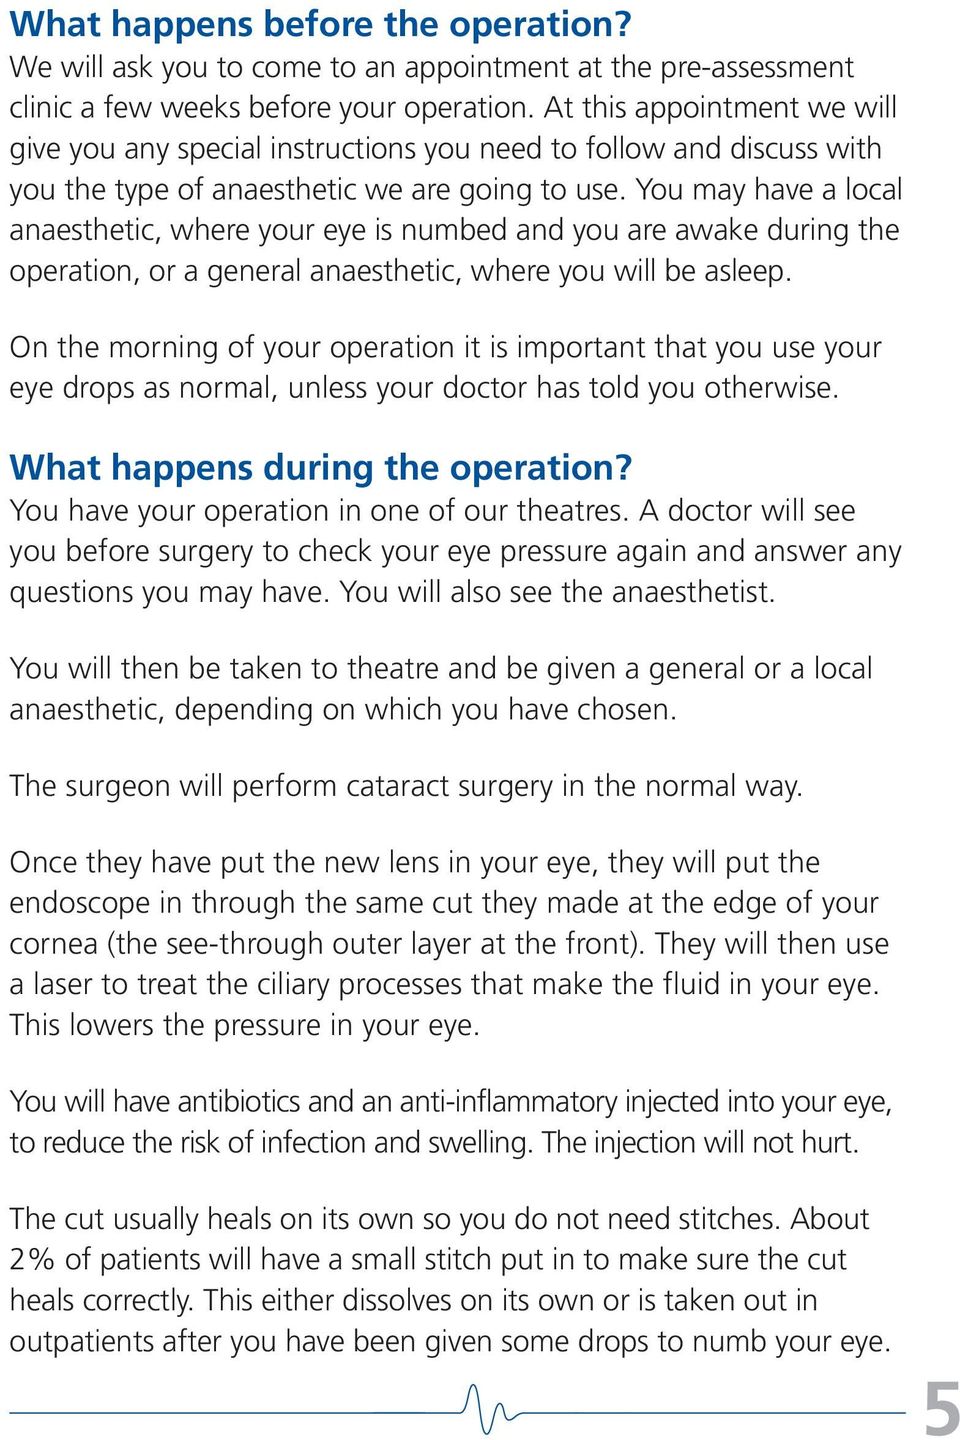 You may have a local anaesthetic, where your eye is numbed and you are awake during the operation, or a general anaesthetic, where you will be asleep.